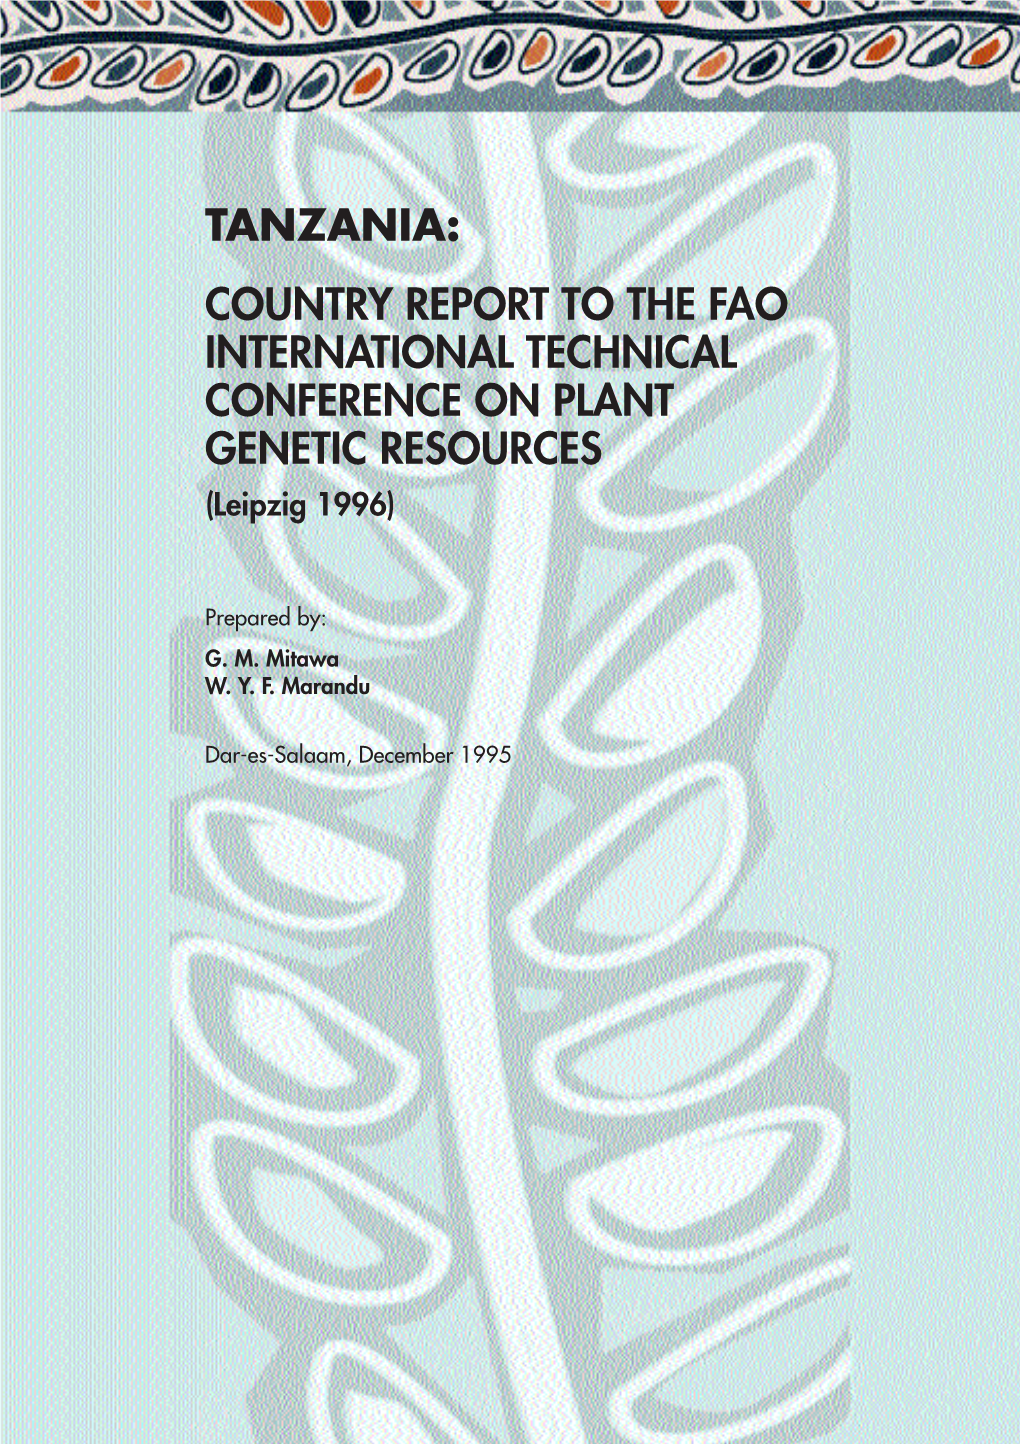 TANZANIA: COUNTRY REPORT to the FAO INTERNATIONAL TECHNICAL CONFERENCE on PLANT GENETIC RESOURCES (Leipzig 1996)